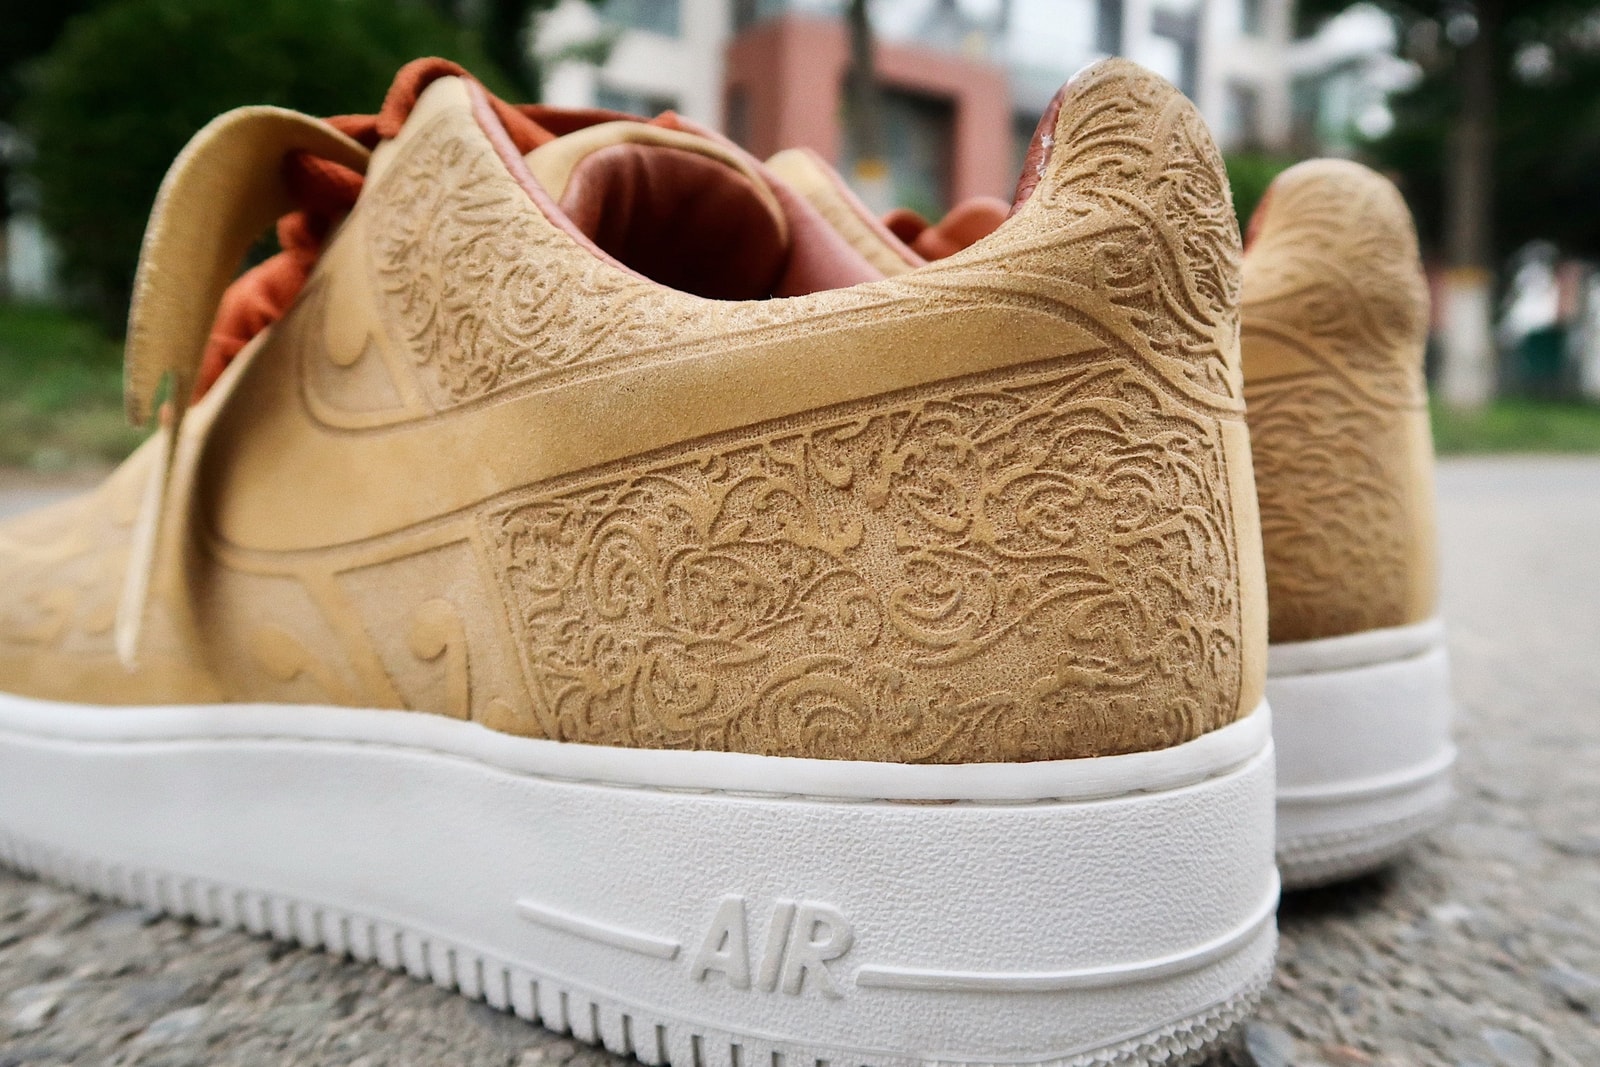 Post-00 sneaker collector Steven Guo and his Air Force 1 